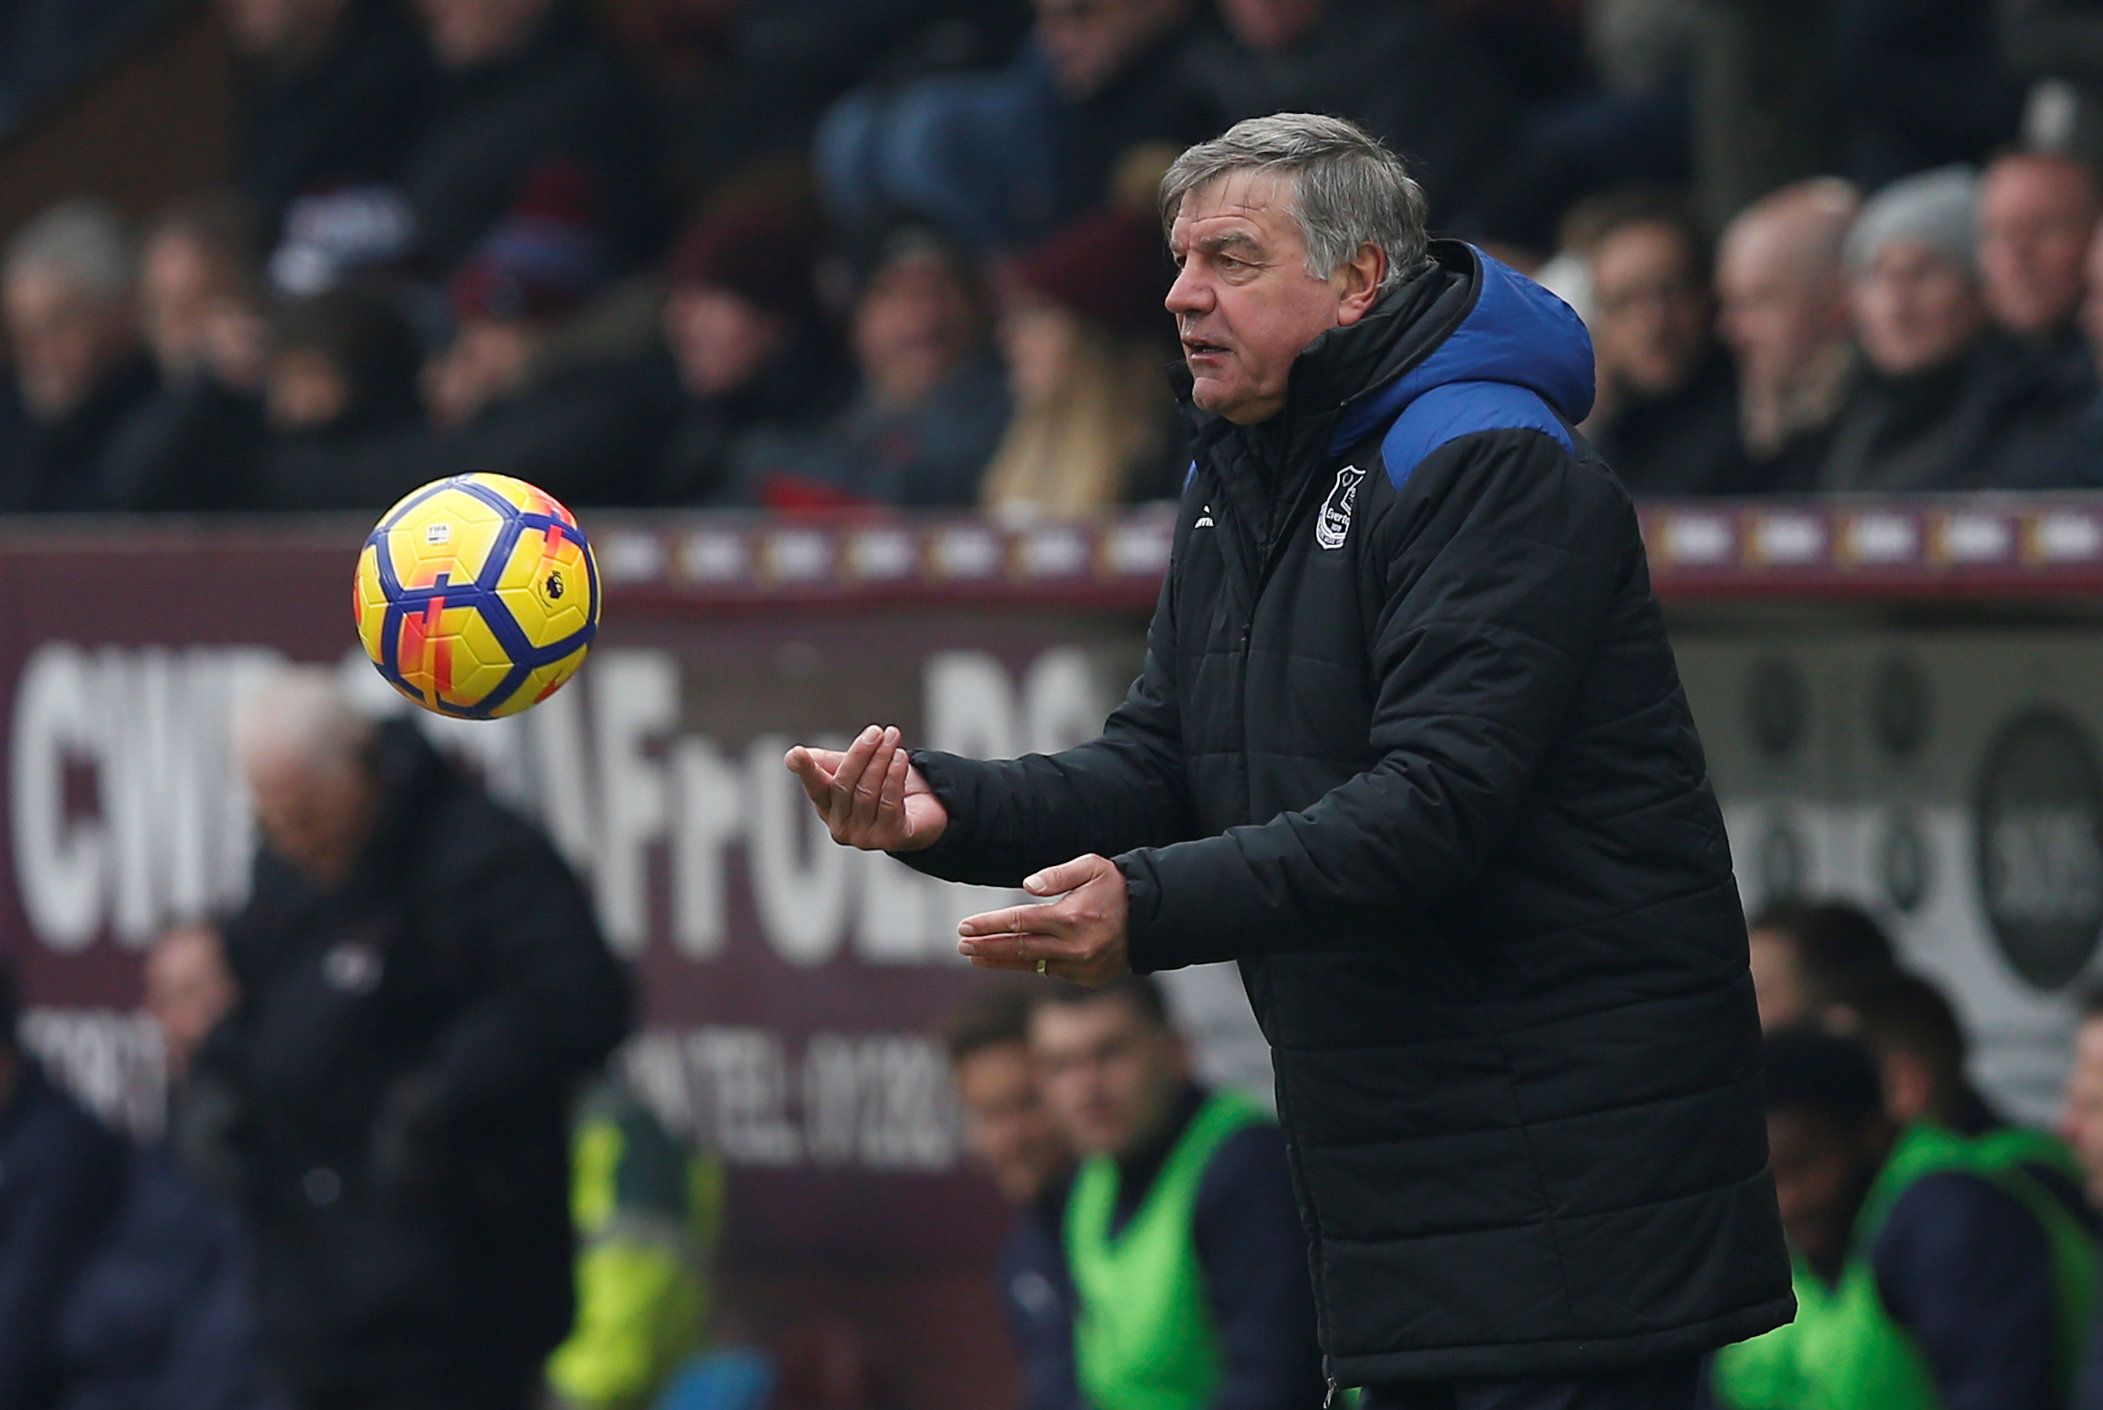 Soccer Football - Premier League - Burnley vs Everton - Turf Moor, Burnley, Britain - March 3, 2018   Everton manager Sam Allardyce   REUTERS/Andrew Yates    EDITORIAL USE ONLY. No use with unauthorized audio, video, data, fixture lists, club/league logos or 